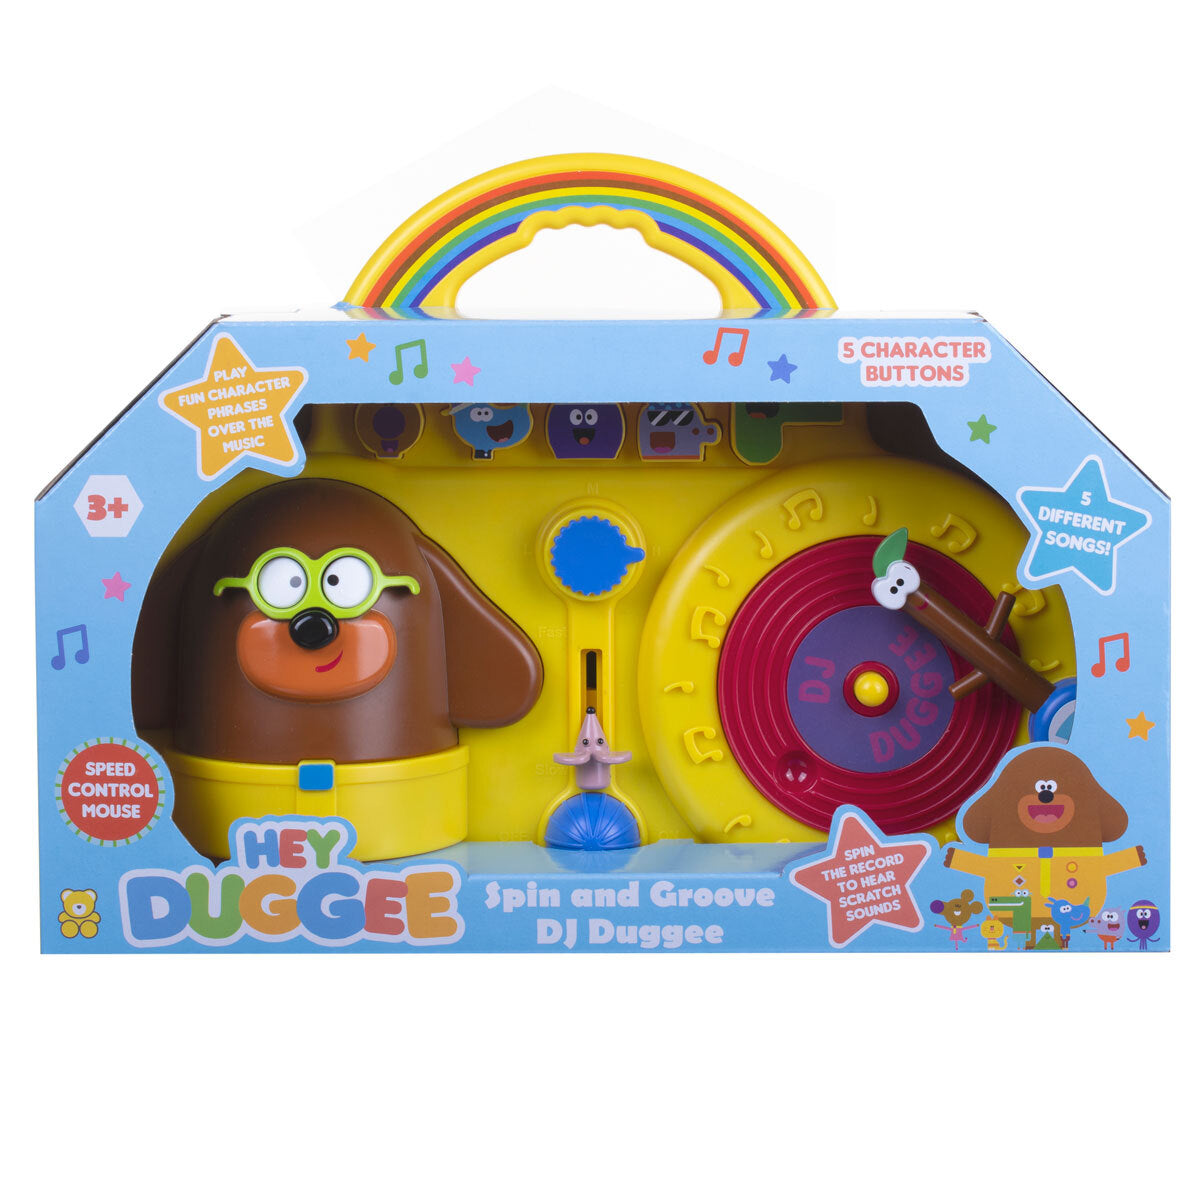 Hey Duggee: Spin and Groove DJ Deck Toy